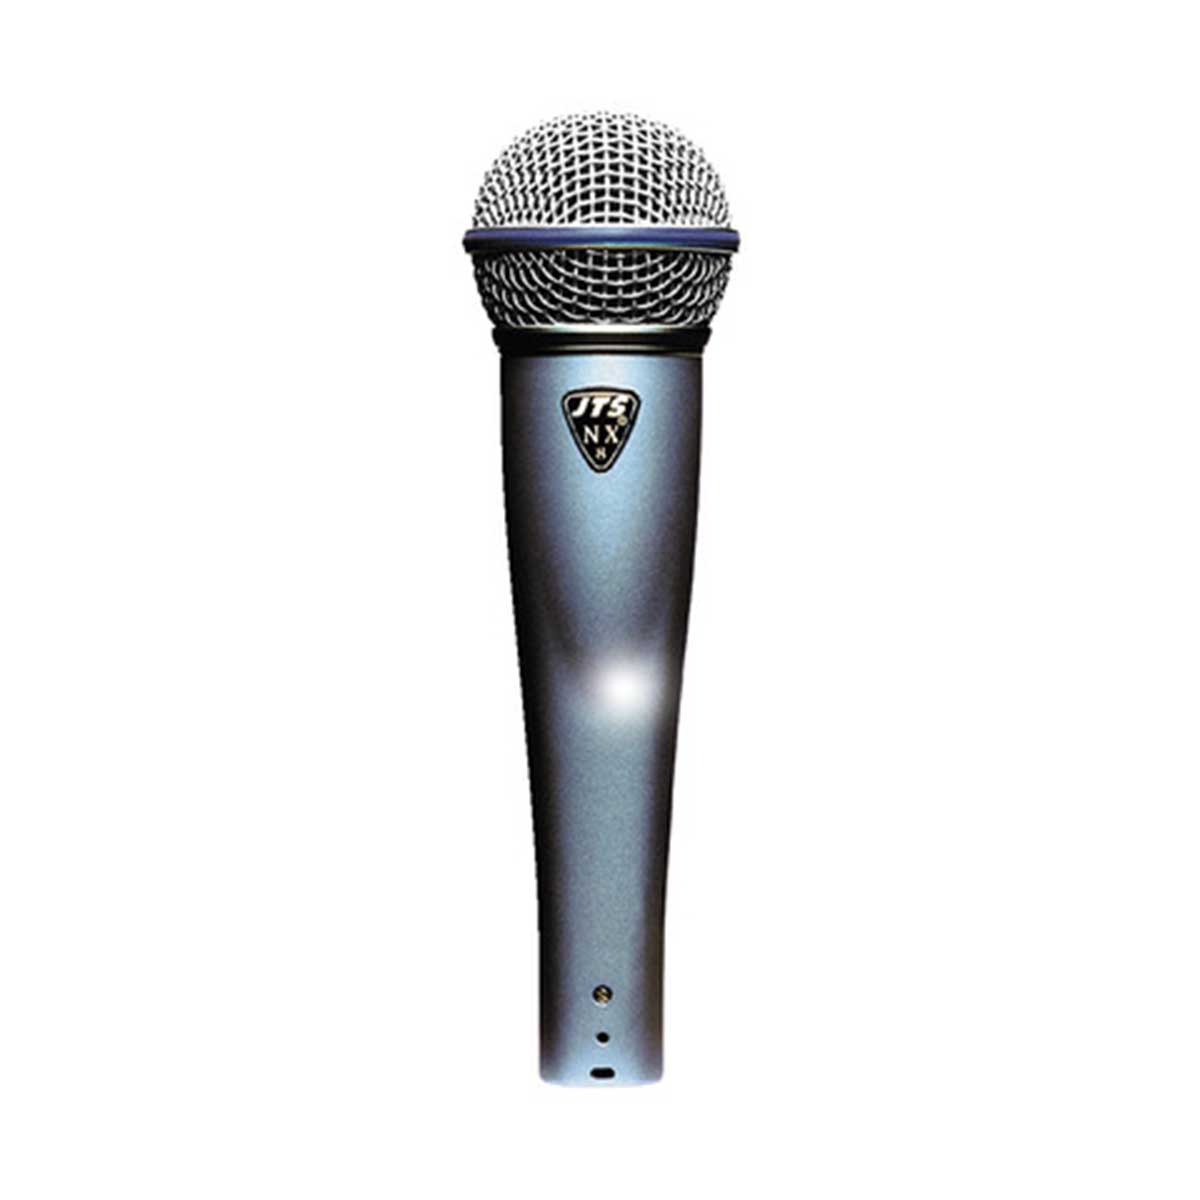 JTS NX8 Handheld dynamic mic for vocals